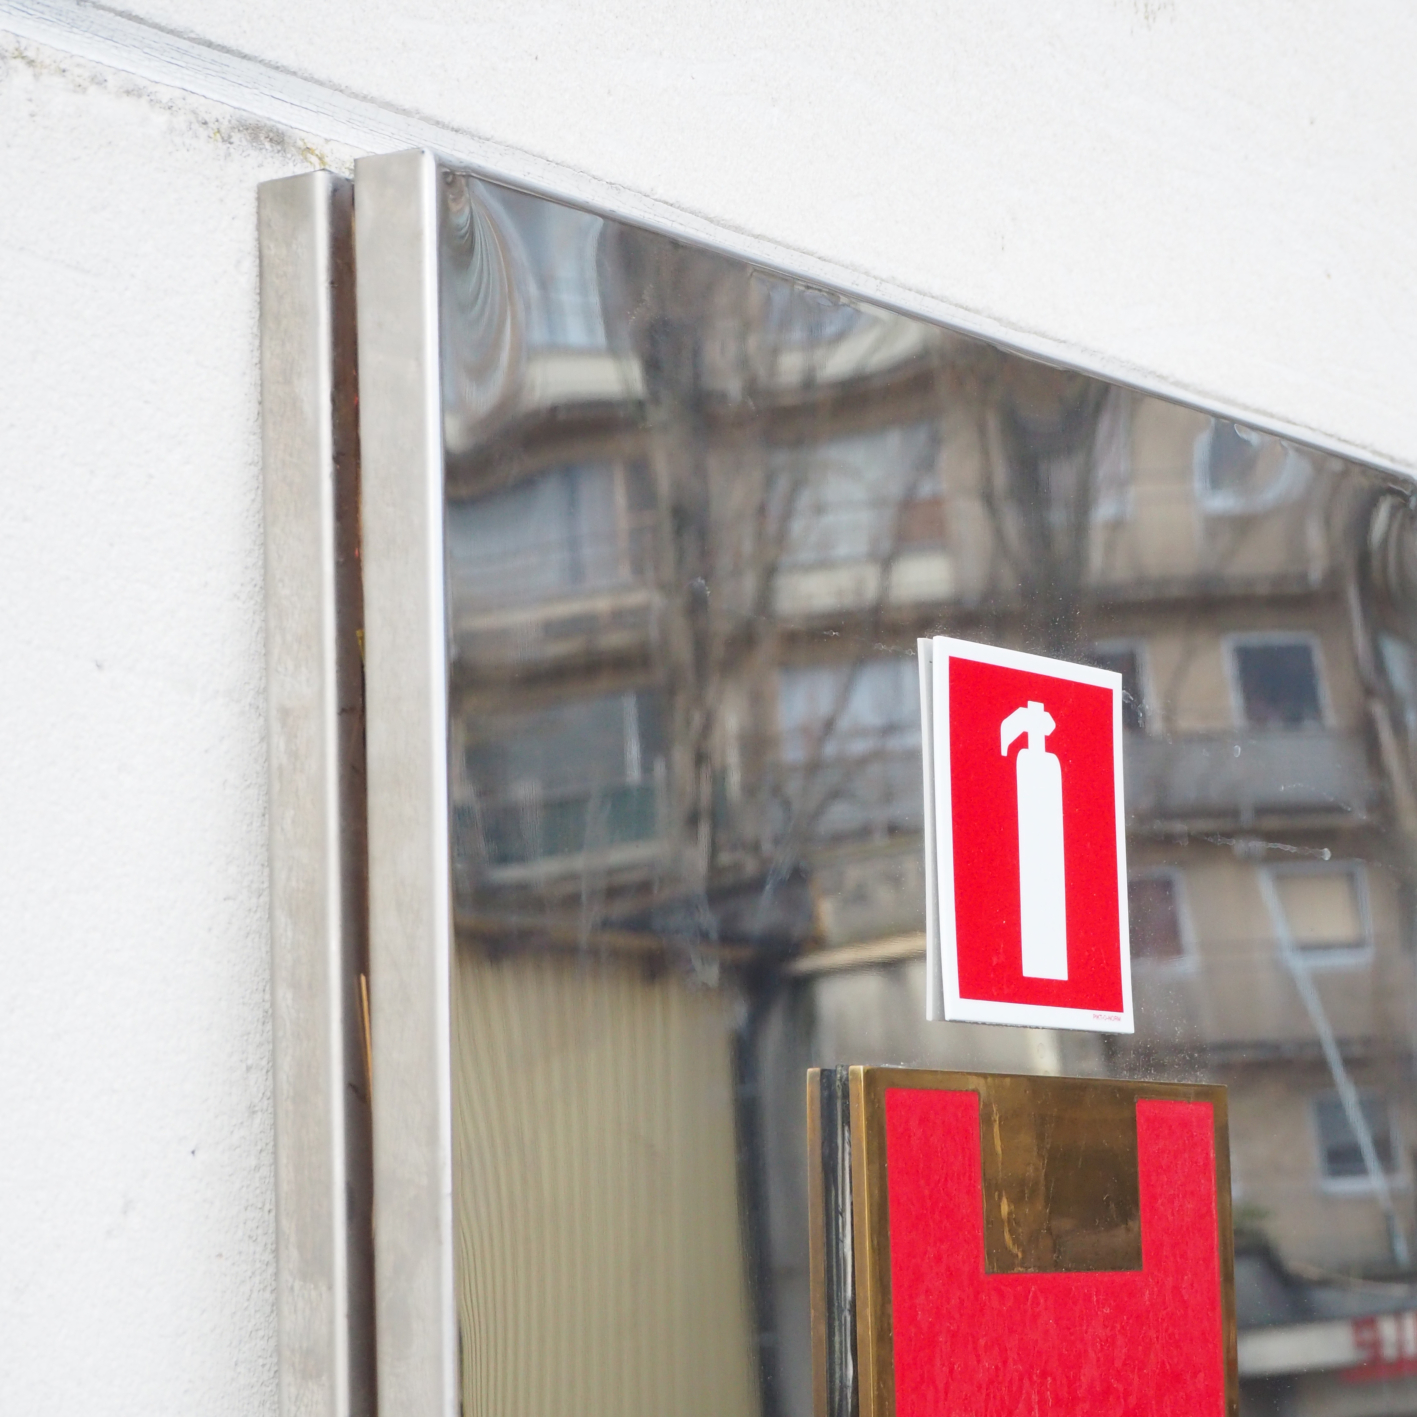 Service door in stainless steel by ‘Jules Wabbes’ with emergency signage (H. 199 cm x 52,8 cm) – Left